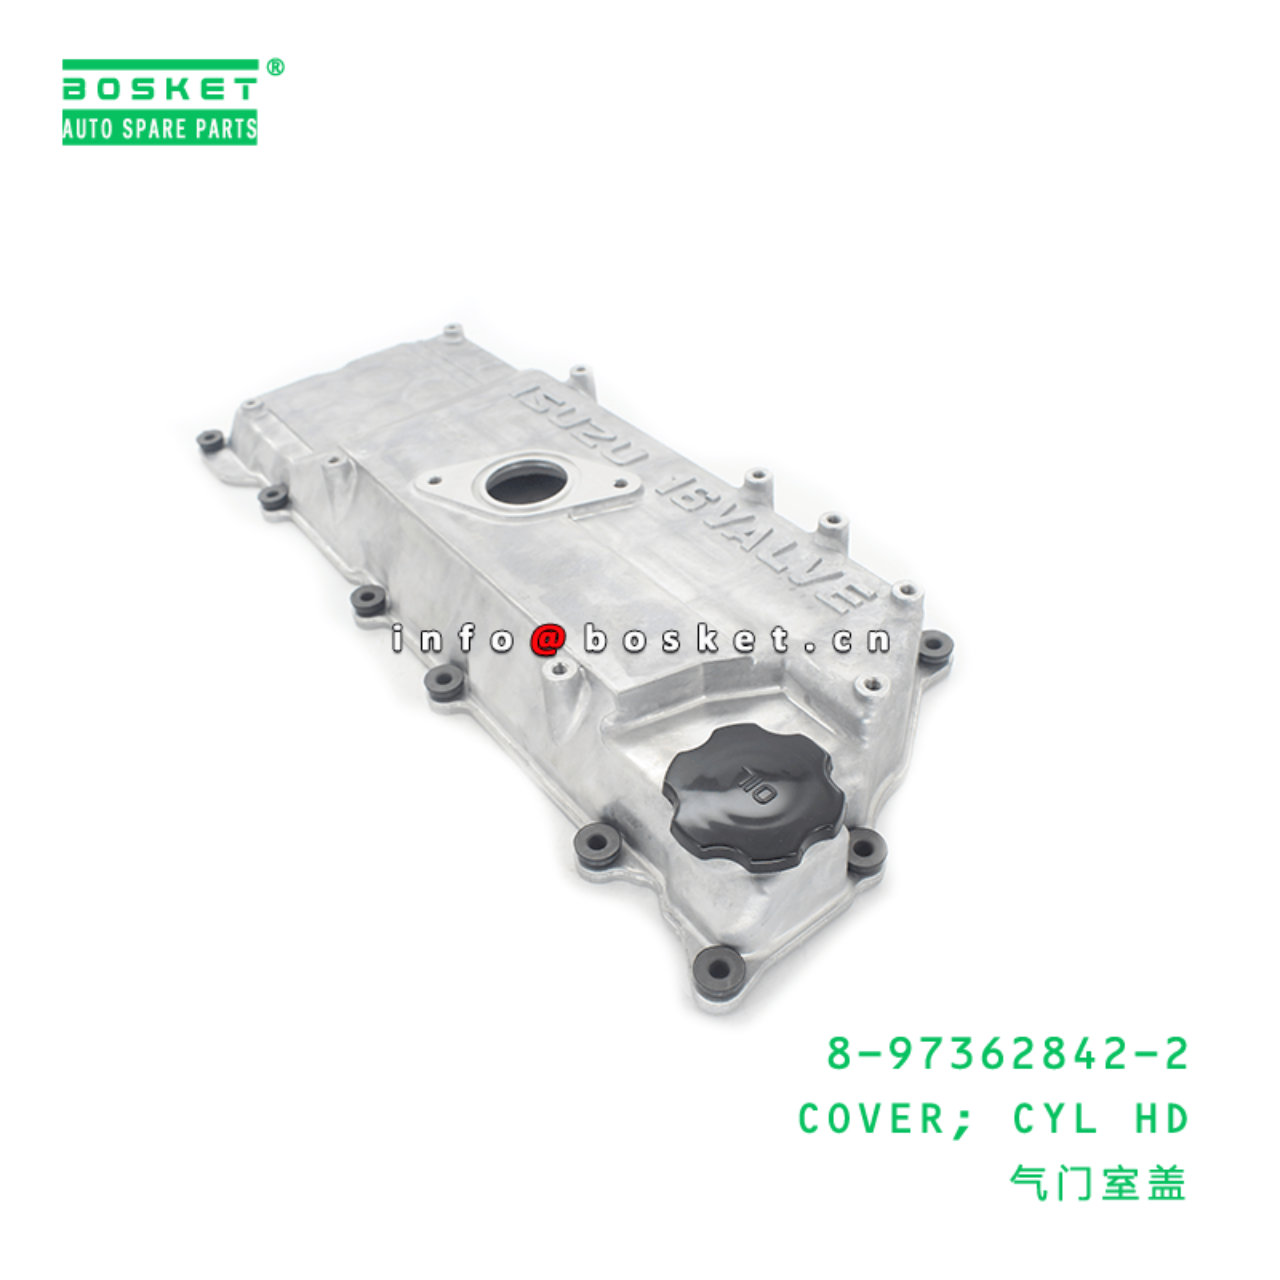 8-97362842-2 Cylinder Head Cover 8973628422 Suitable for ISUZU XD 4HK1